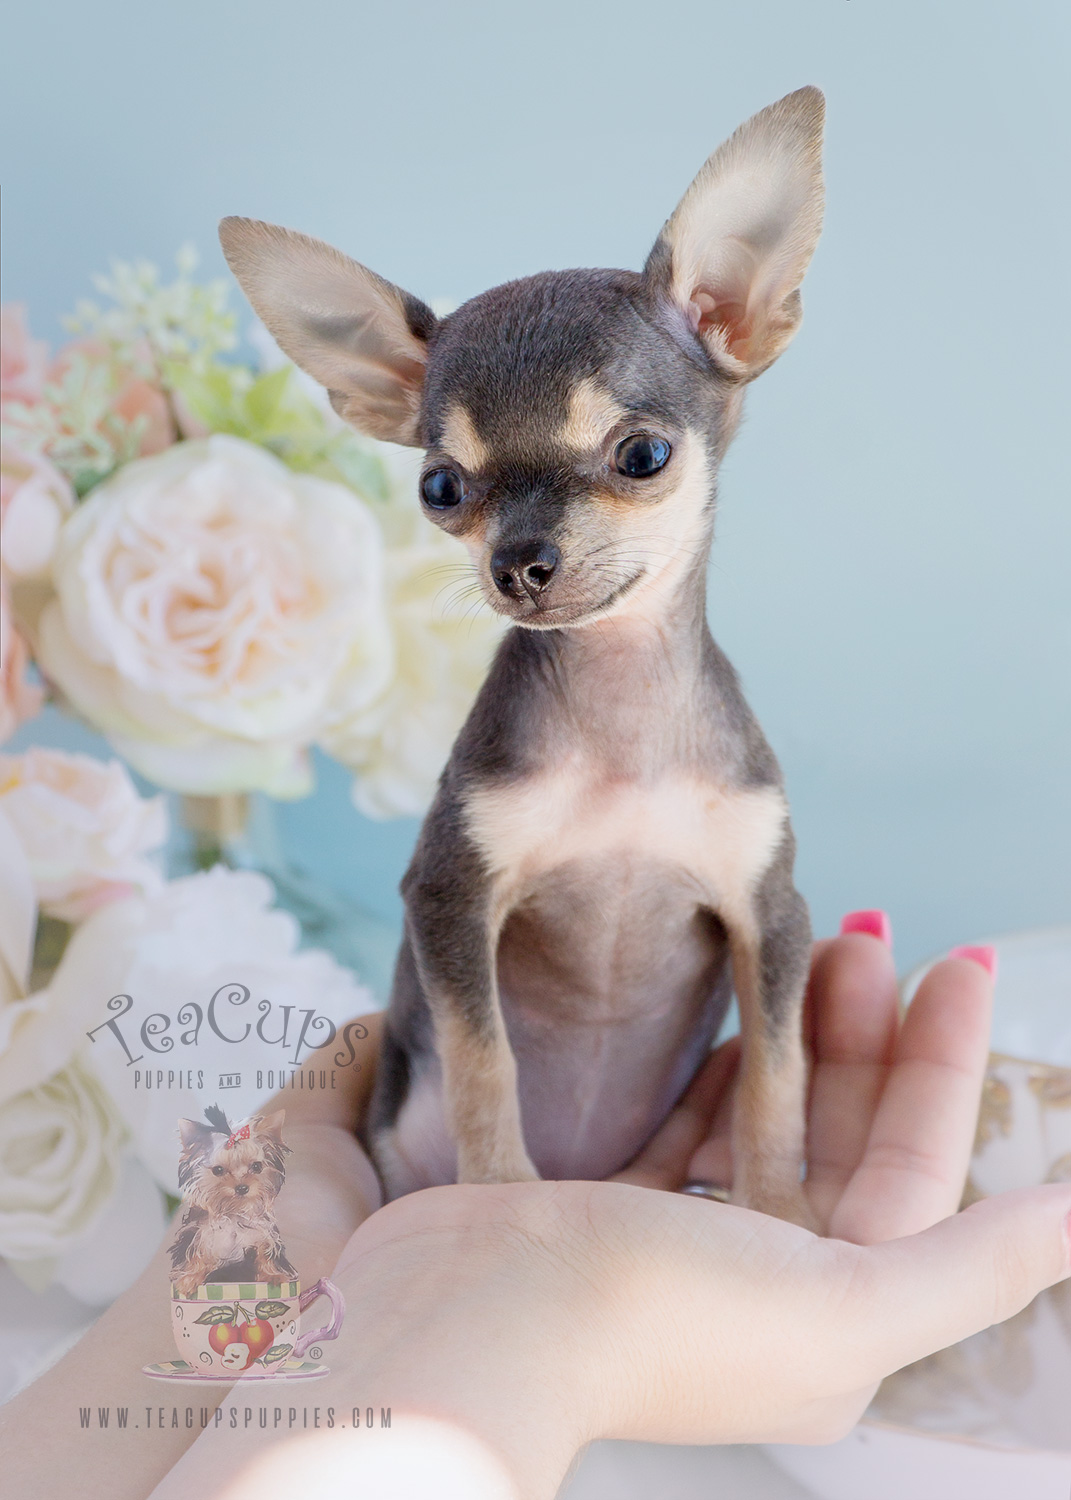 Blue Chihuahua Puppies Teacups, Puppies & Boutique